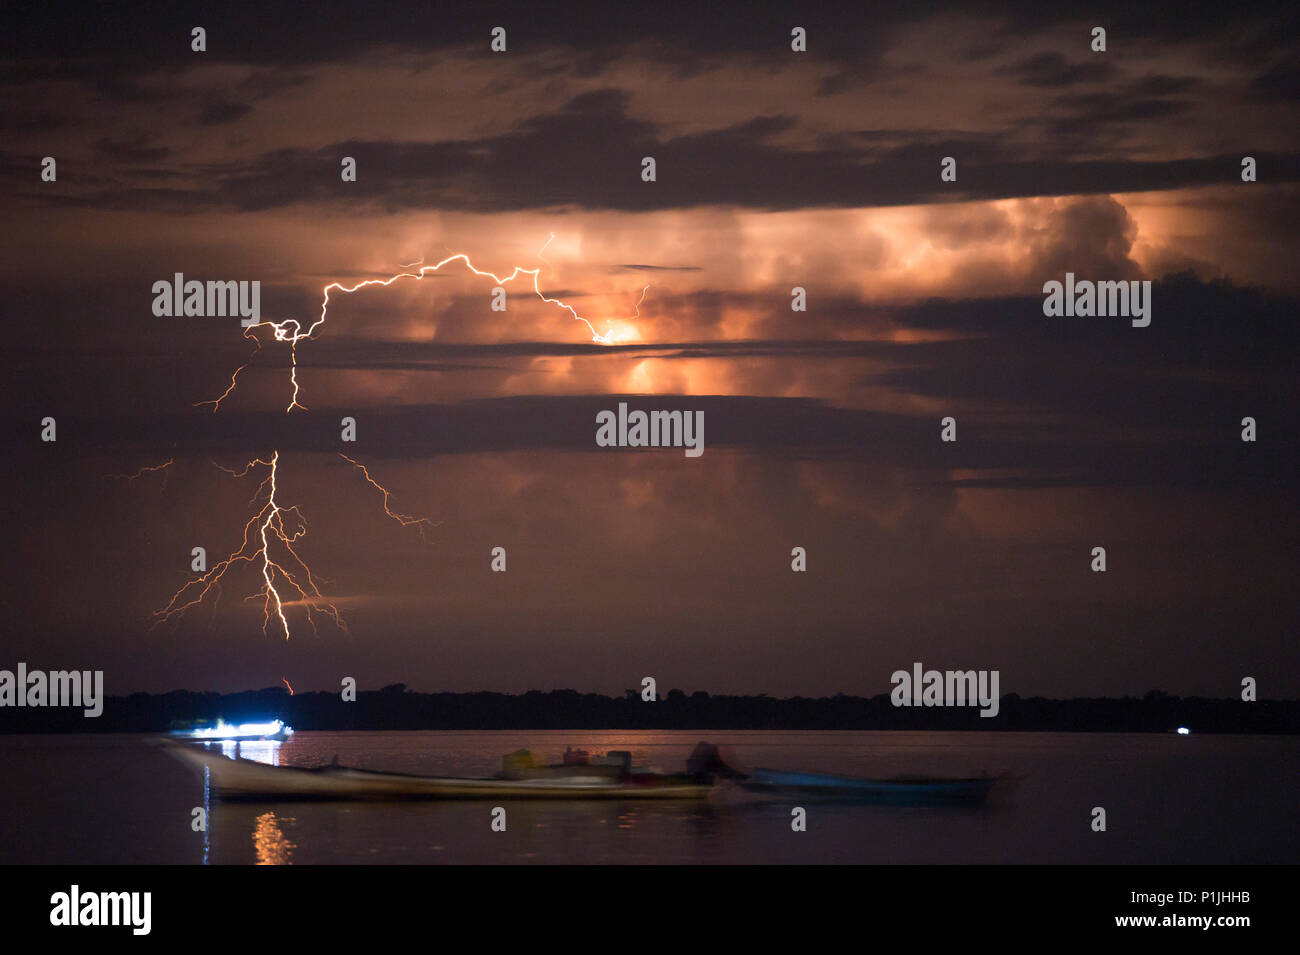 Distant positive cloud-to-ground discharges behind fisher boats on lake Maracaibo (Catatumbo thunderstorm, the place with the highest lightning density worldwide), Ologa, Zulia, Venezuela, South America Stock Photo